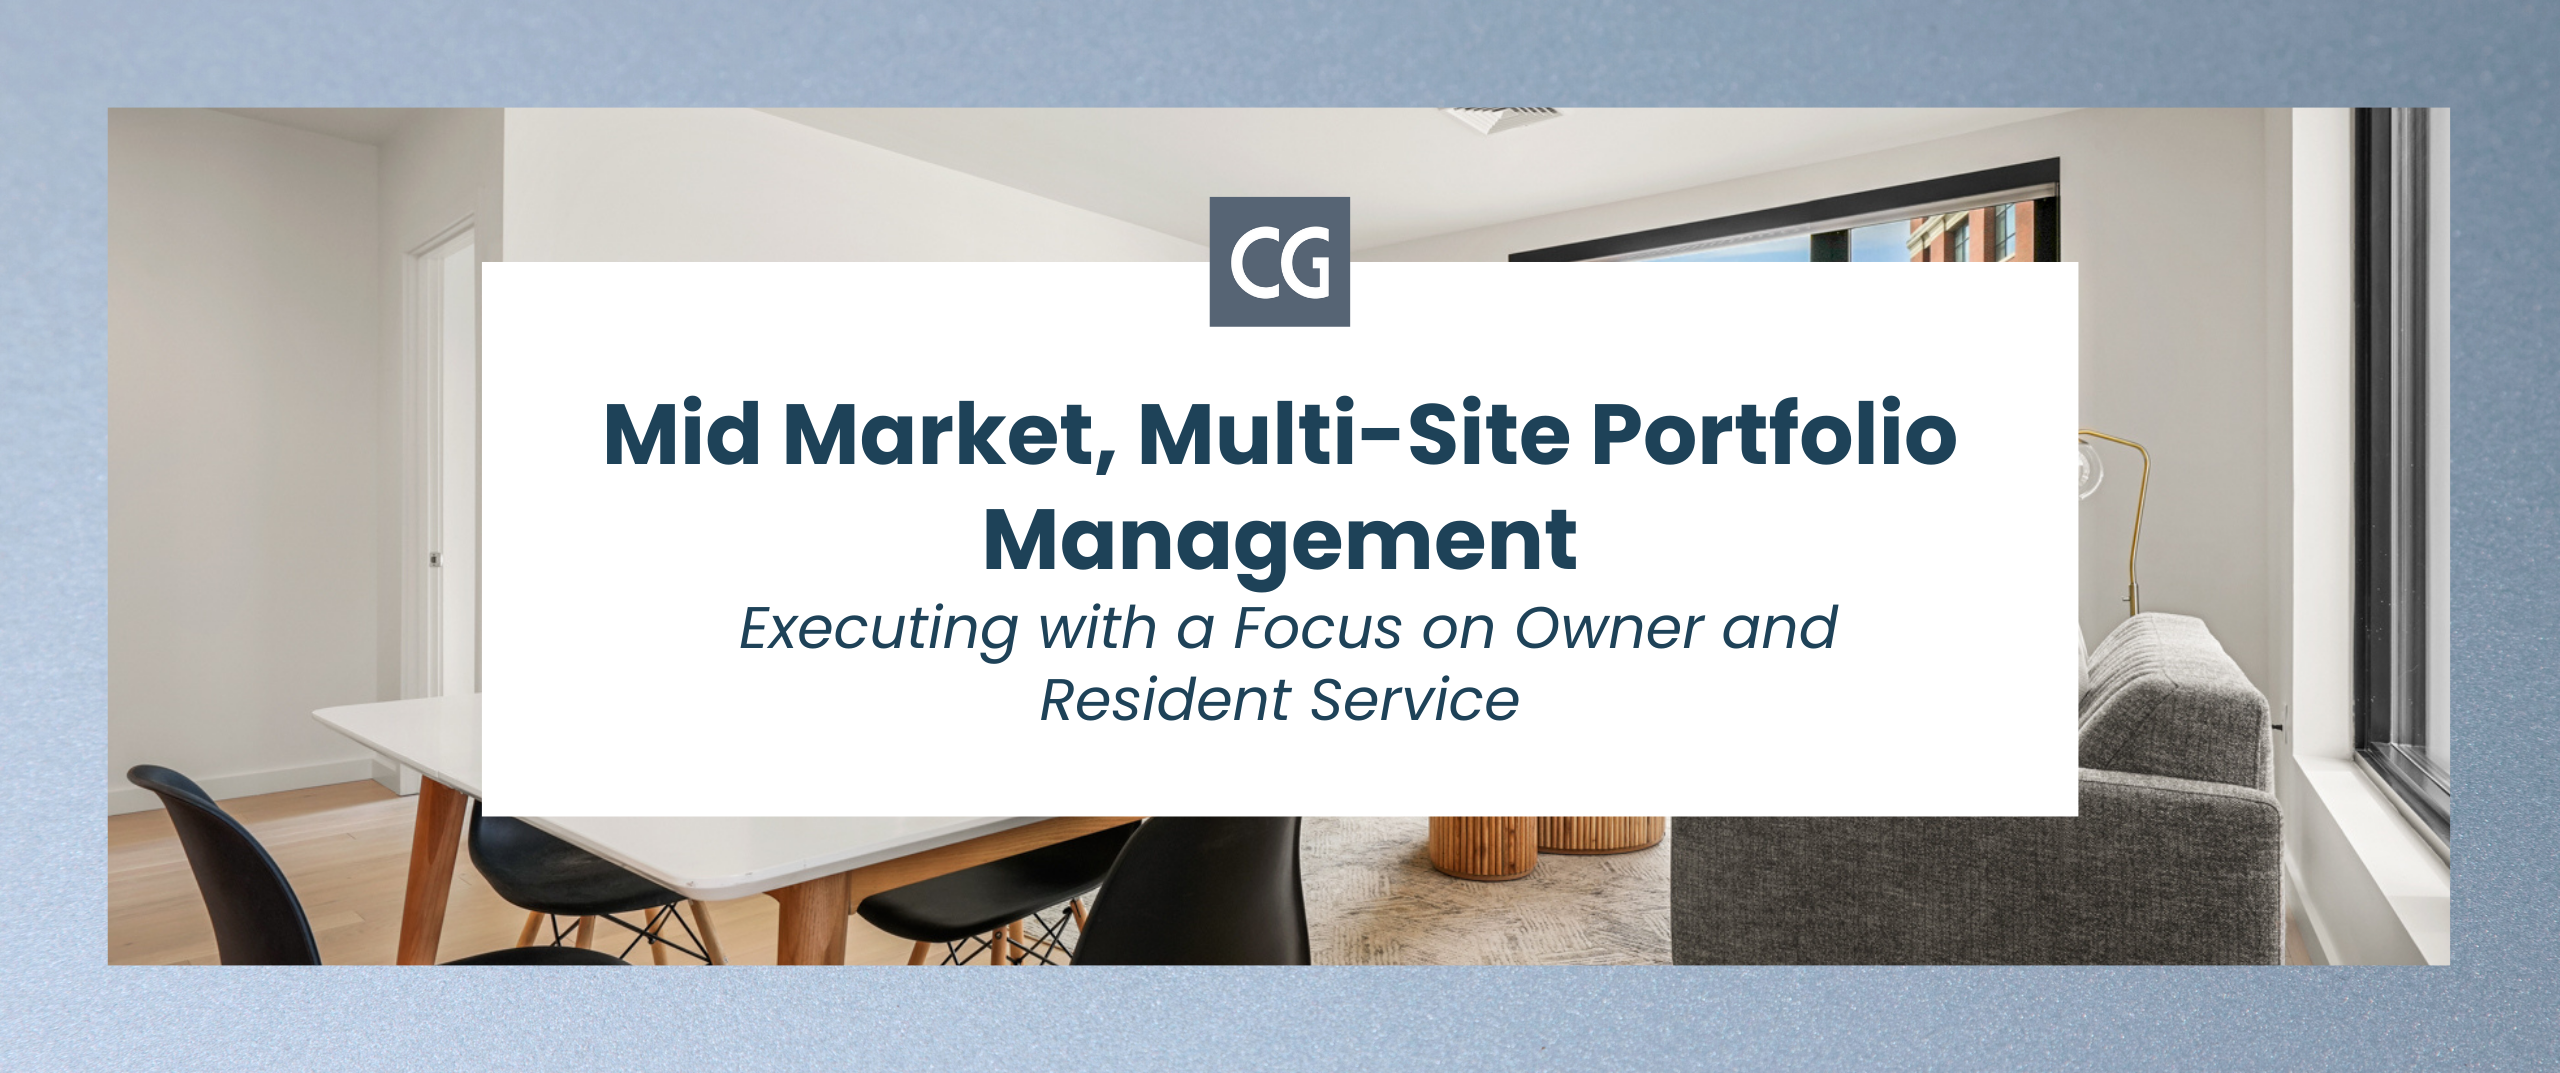 Mid Market, Multi-Site Portfolio Management - Executing with a focus on Owner and Resident Service